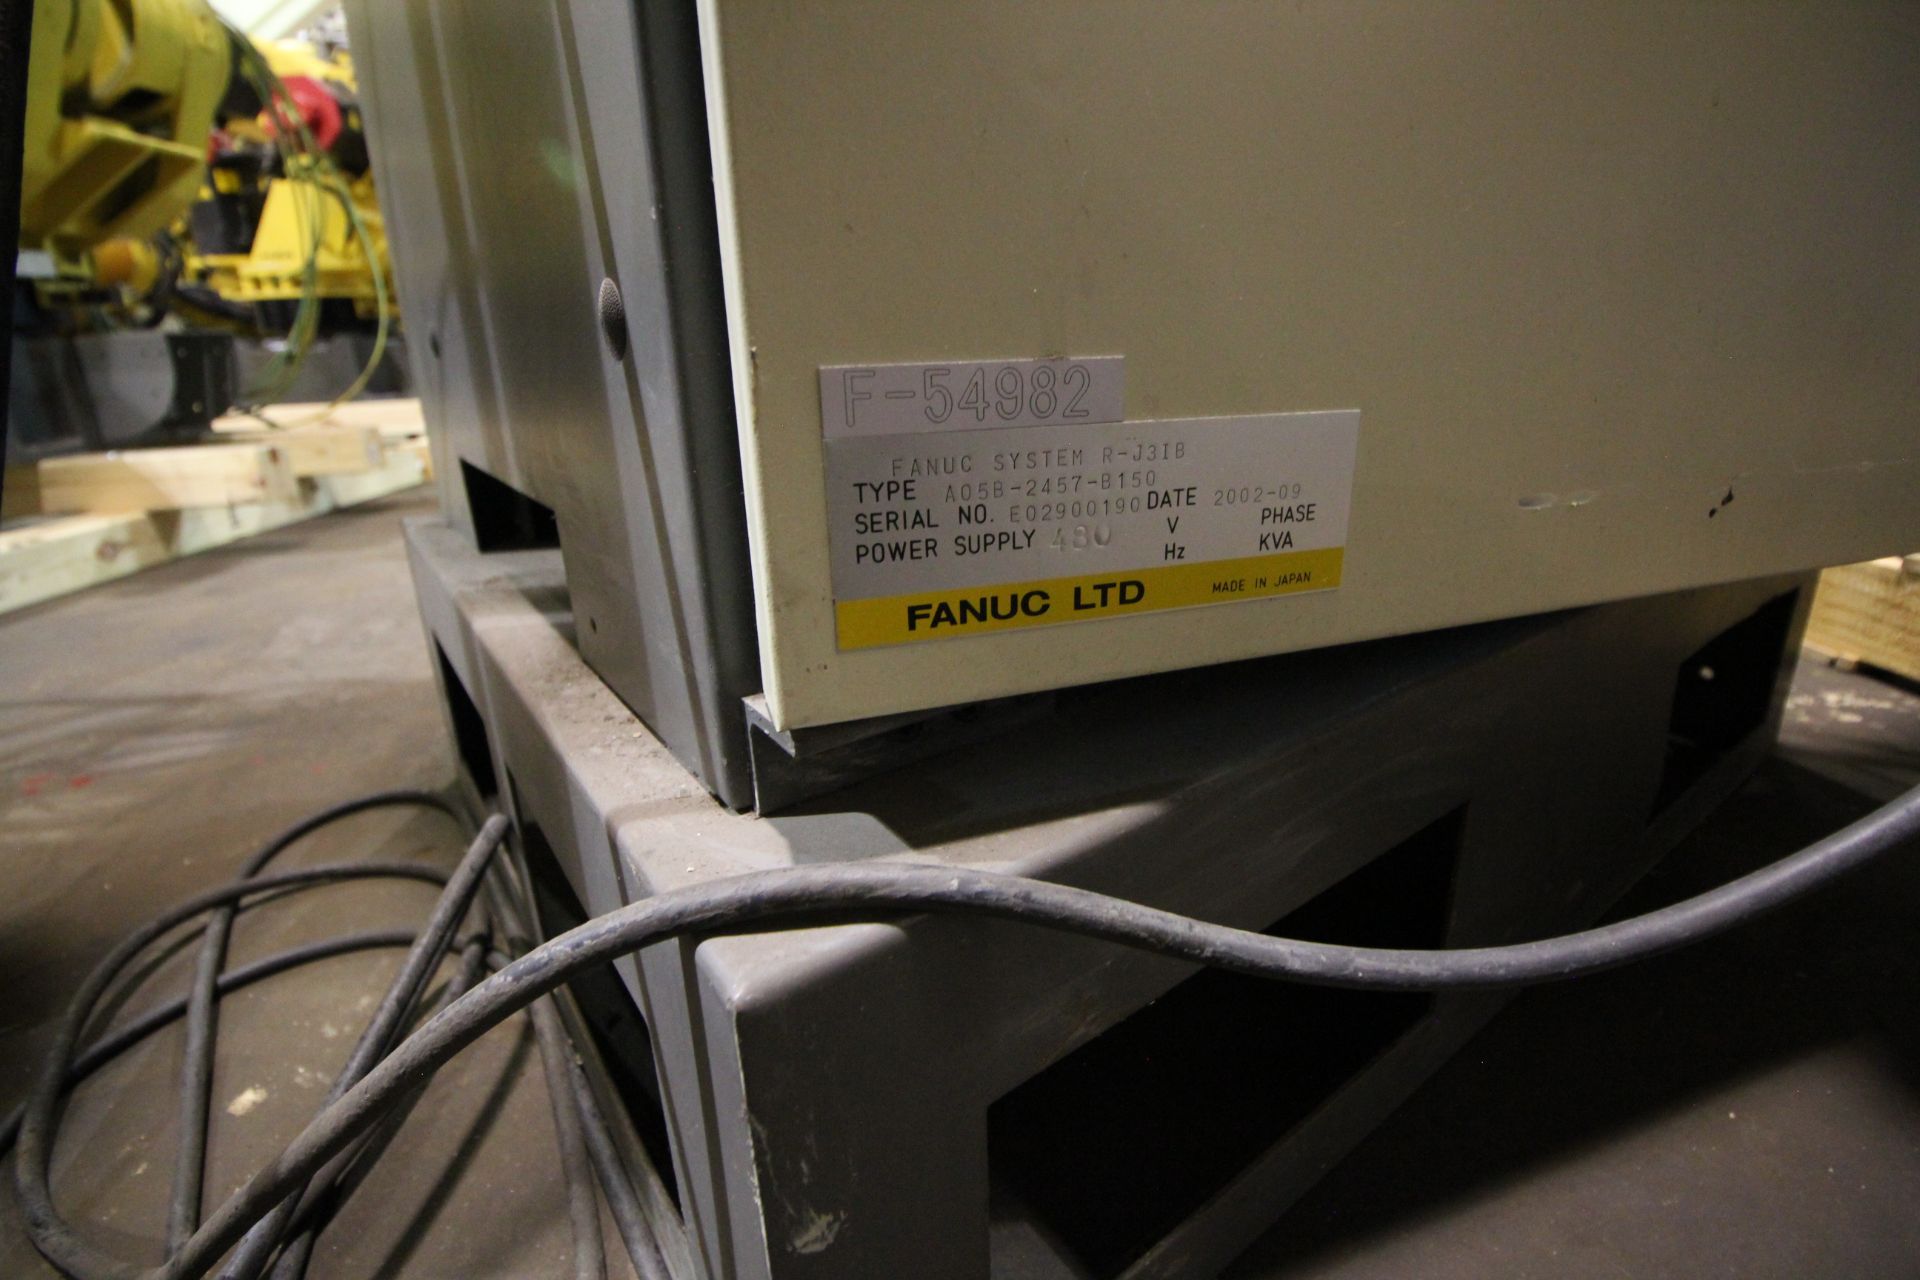 ﻿FANUC ROBOT S-500iB WITH R-J3iB CONTROLS, TEACH PENDANT & CABLES, YEAR 2002, SN 54982 - Image 3 of 7